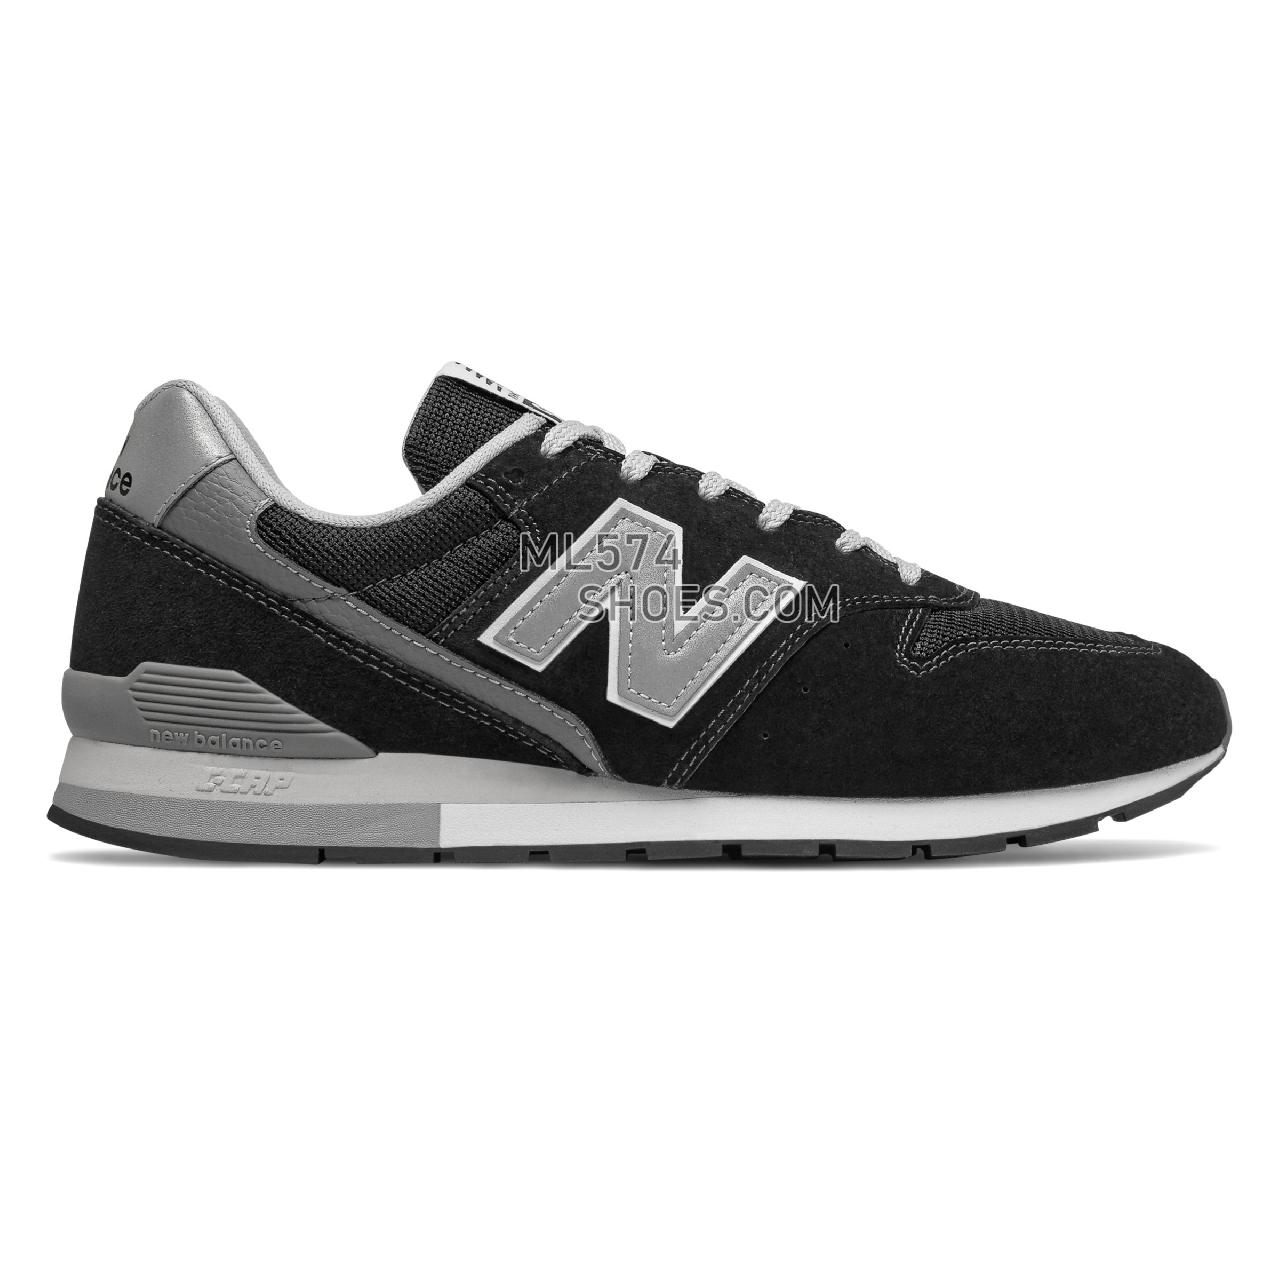 New Balance 996v2 - Men's Classic Sneakers - Black with Silver - CM996BP